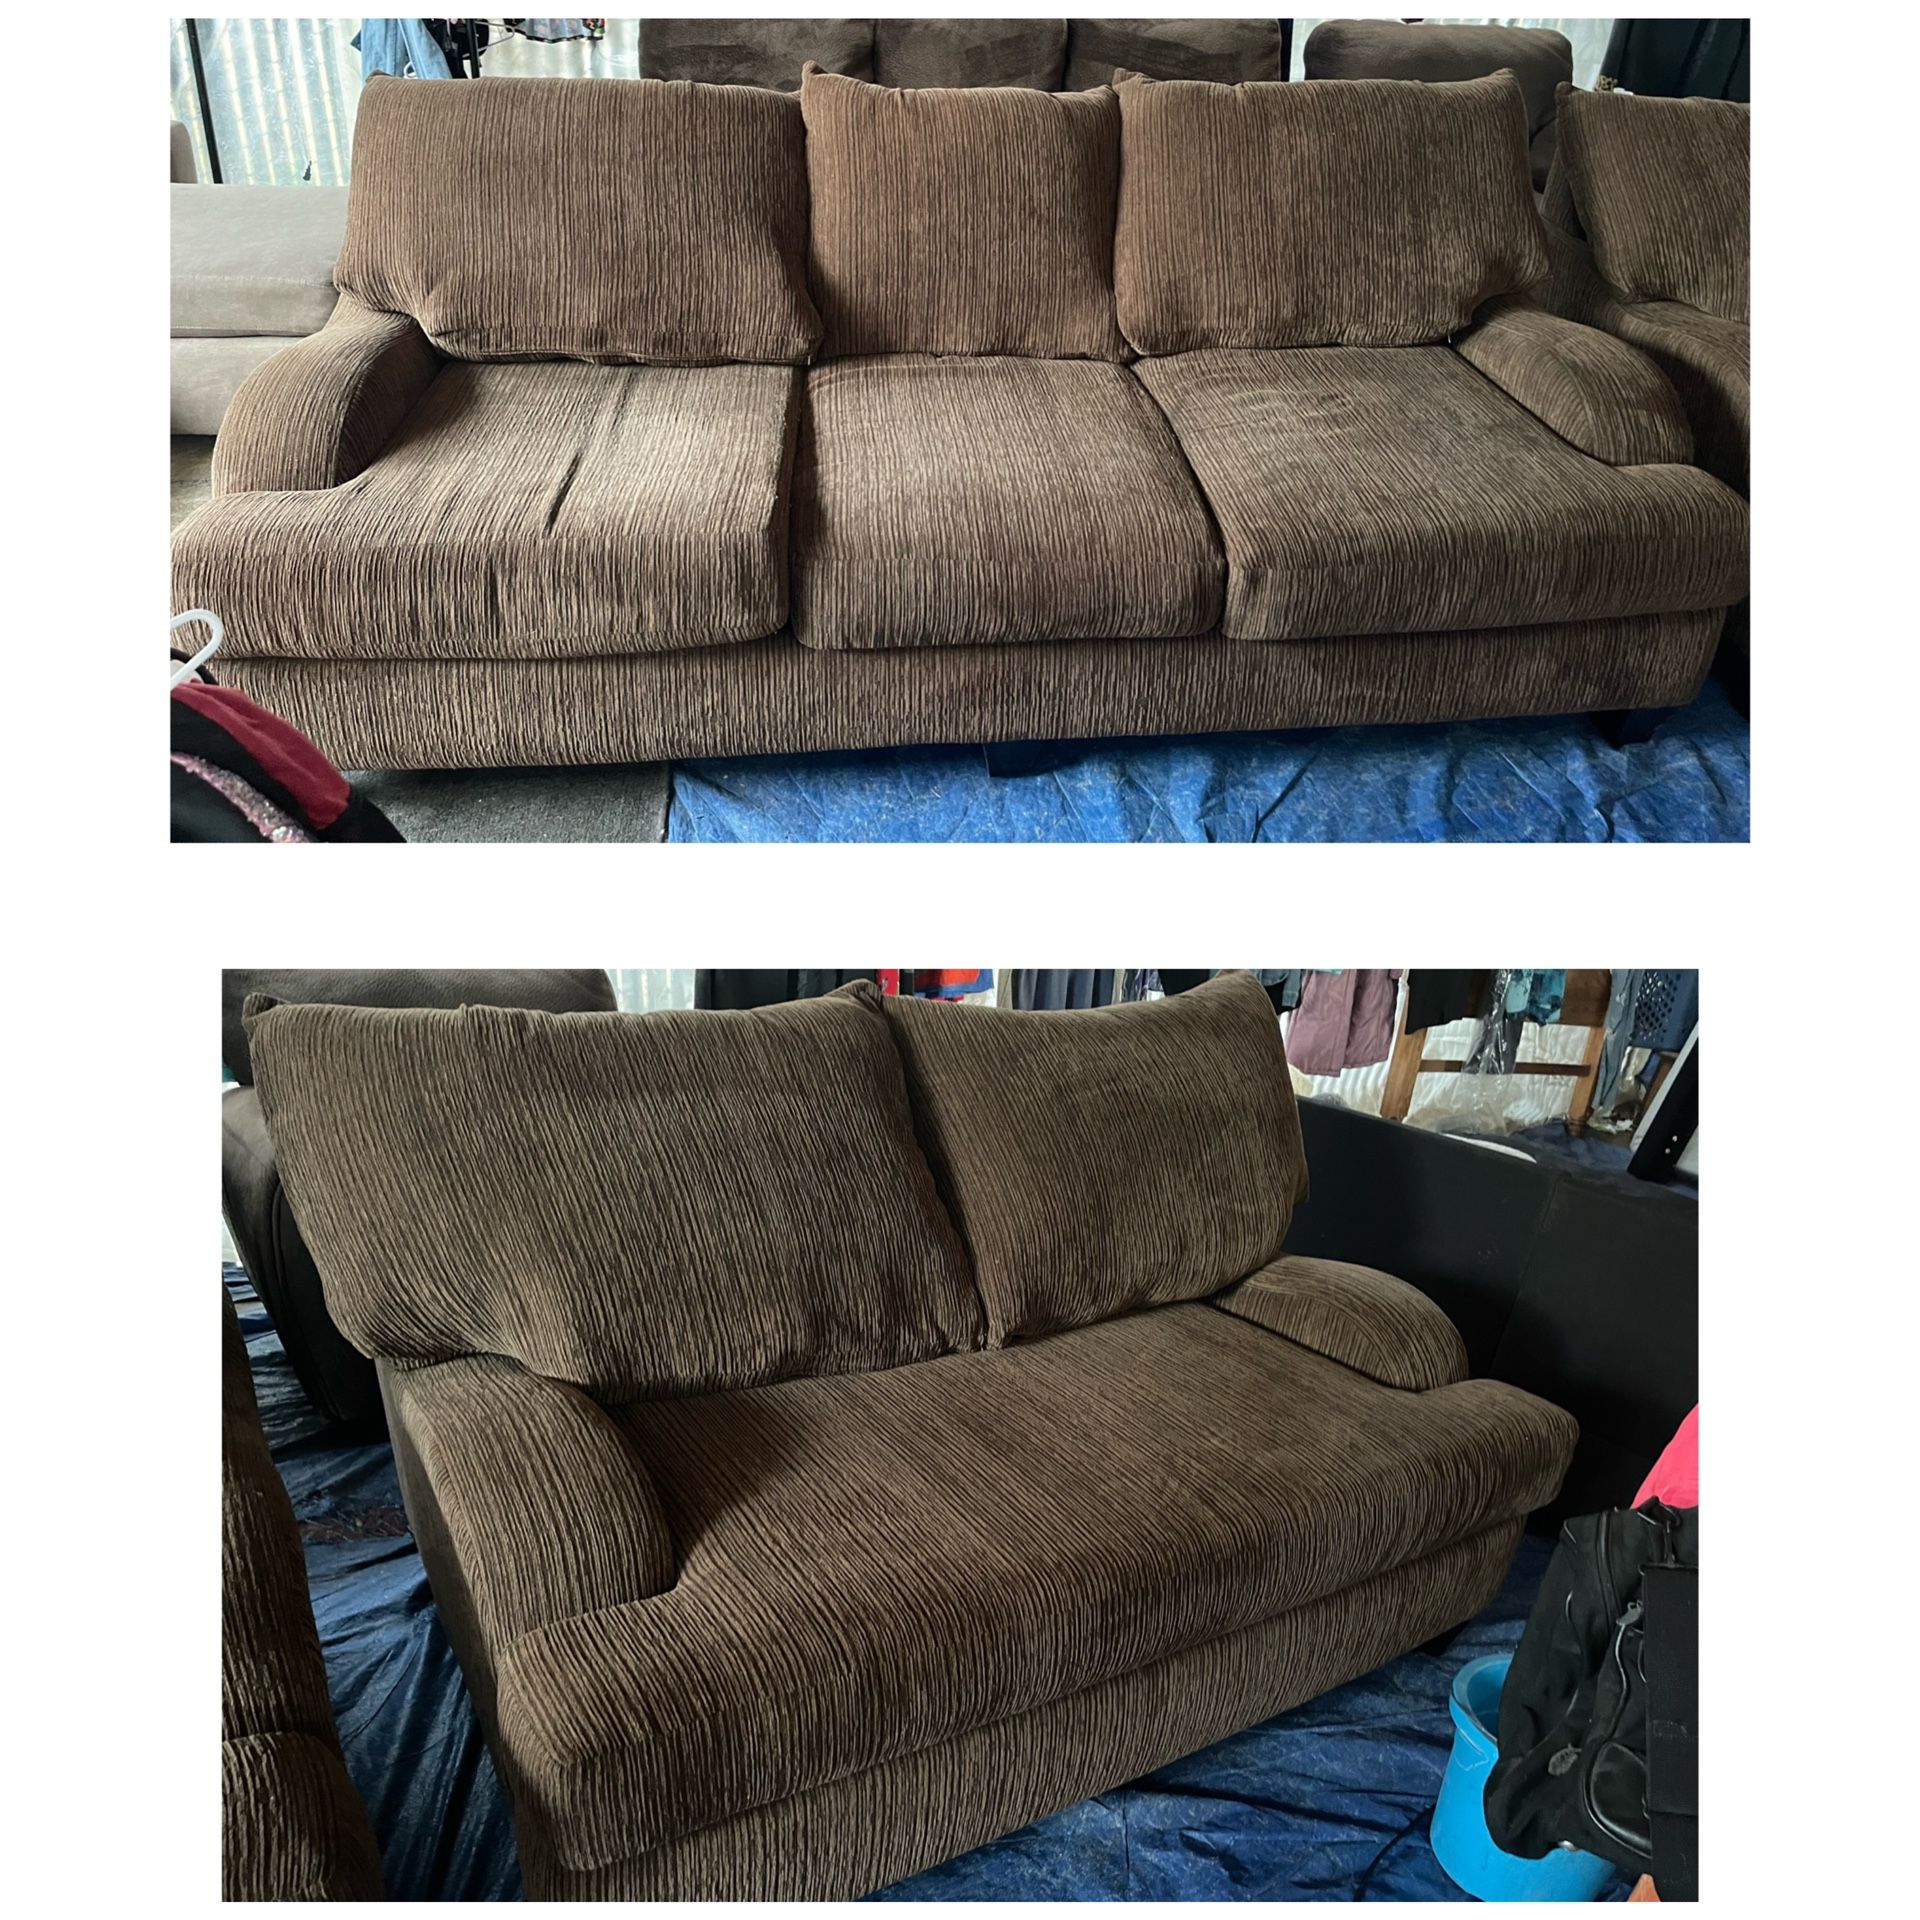 Smoke and pet free clean couch comes with the couch and oversize chair. Great condition we sell all the time delivery extra.